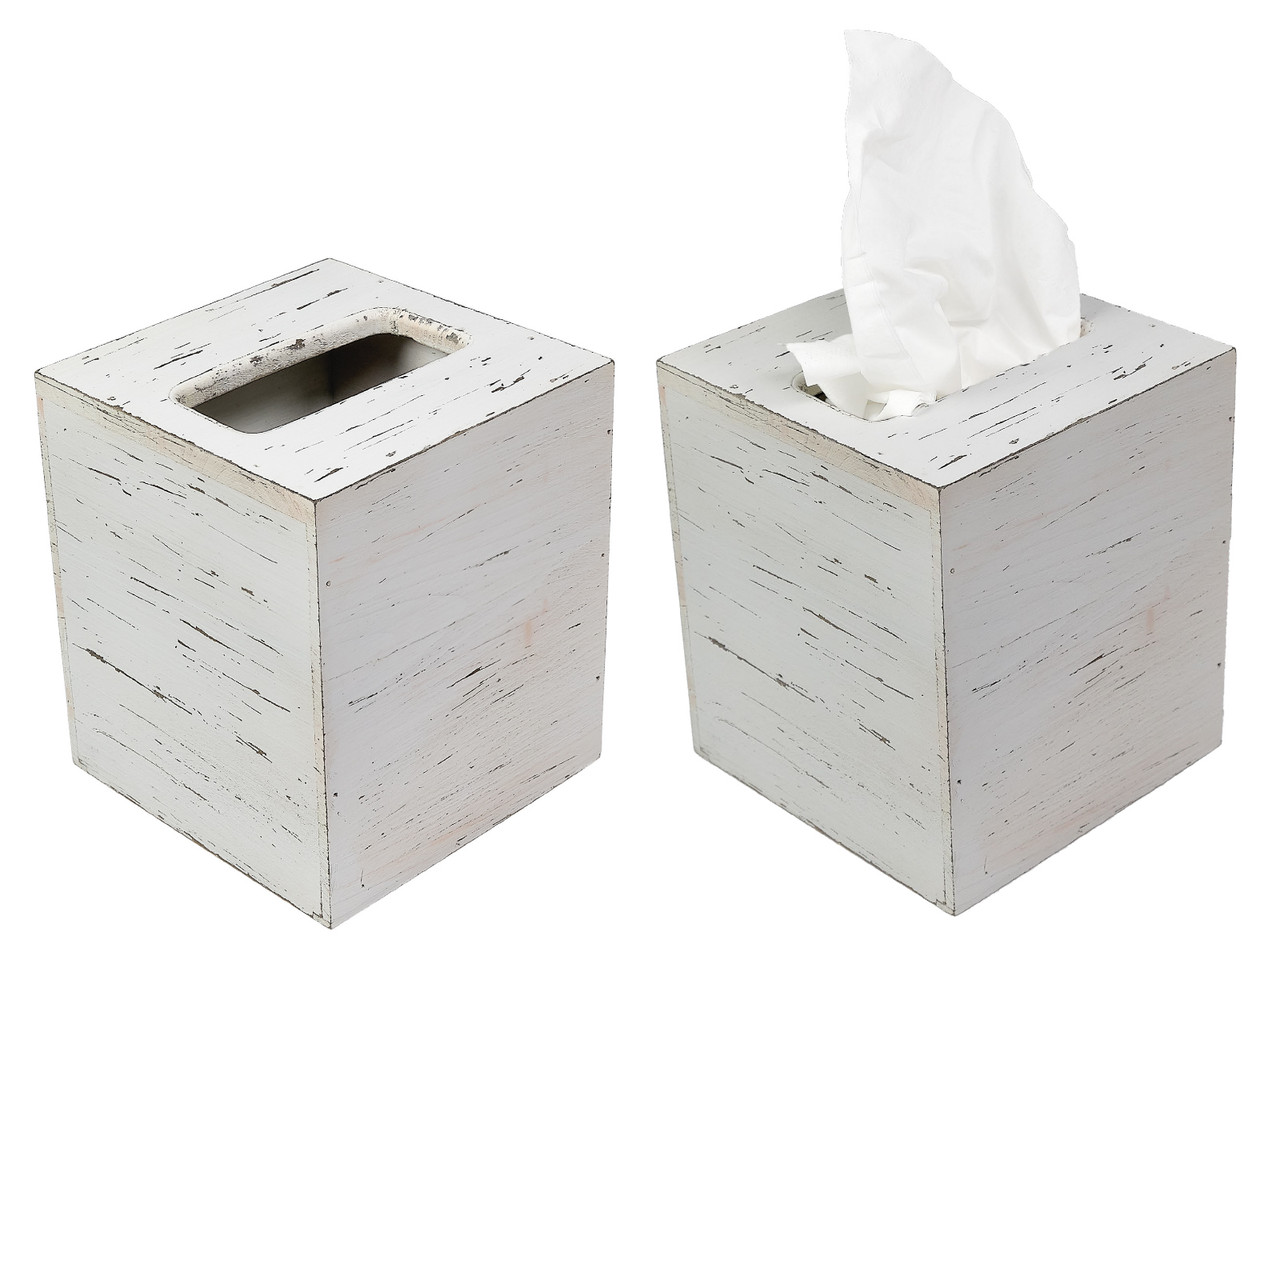 Rustic Wooden Toilet Paper Holder: Tic Tac Toe Design Tissue Roll Storage -  Excello Global Brands